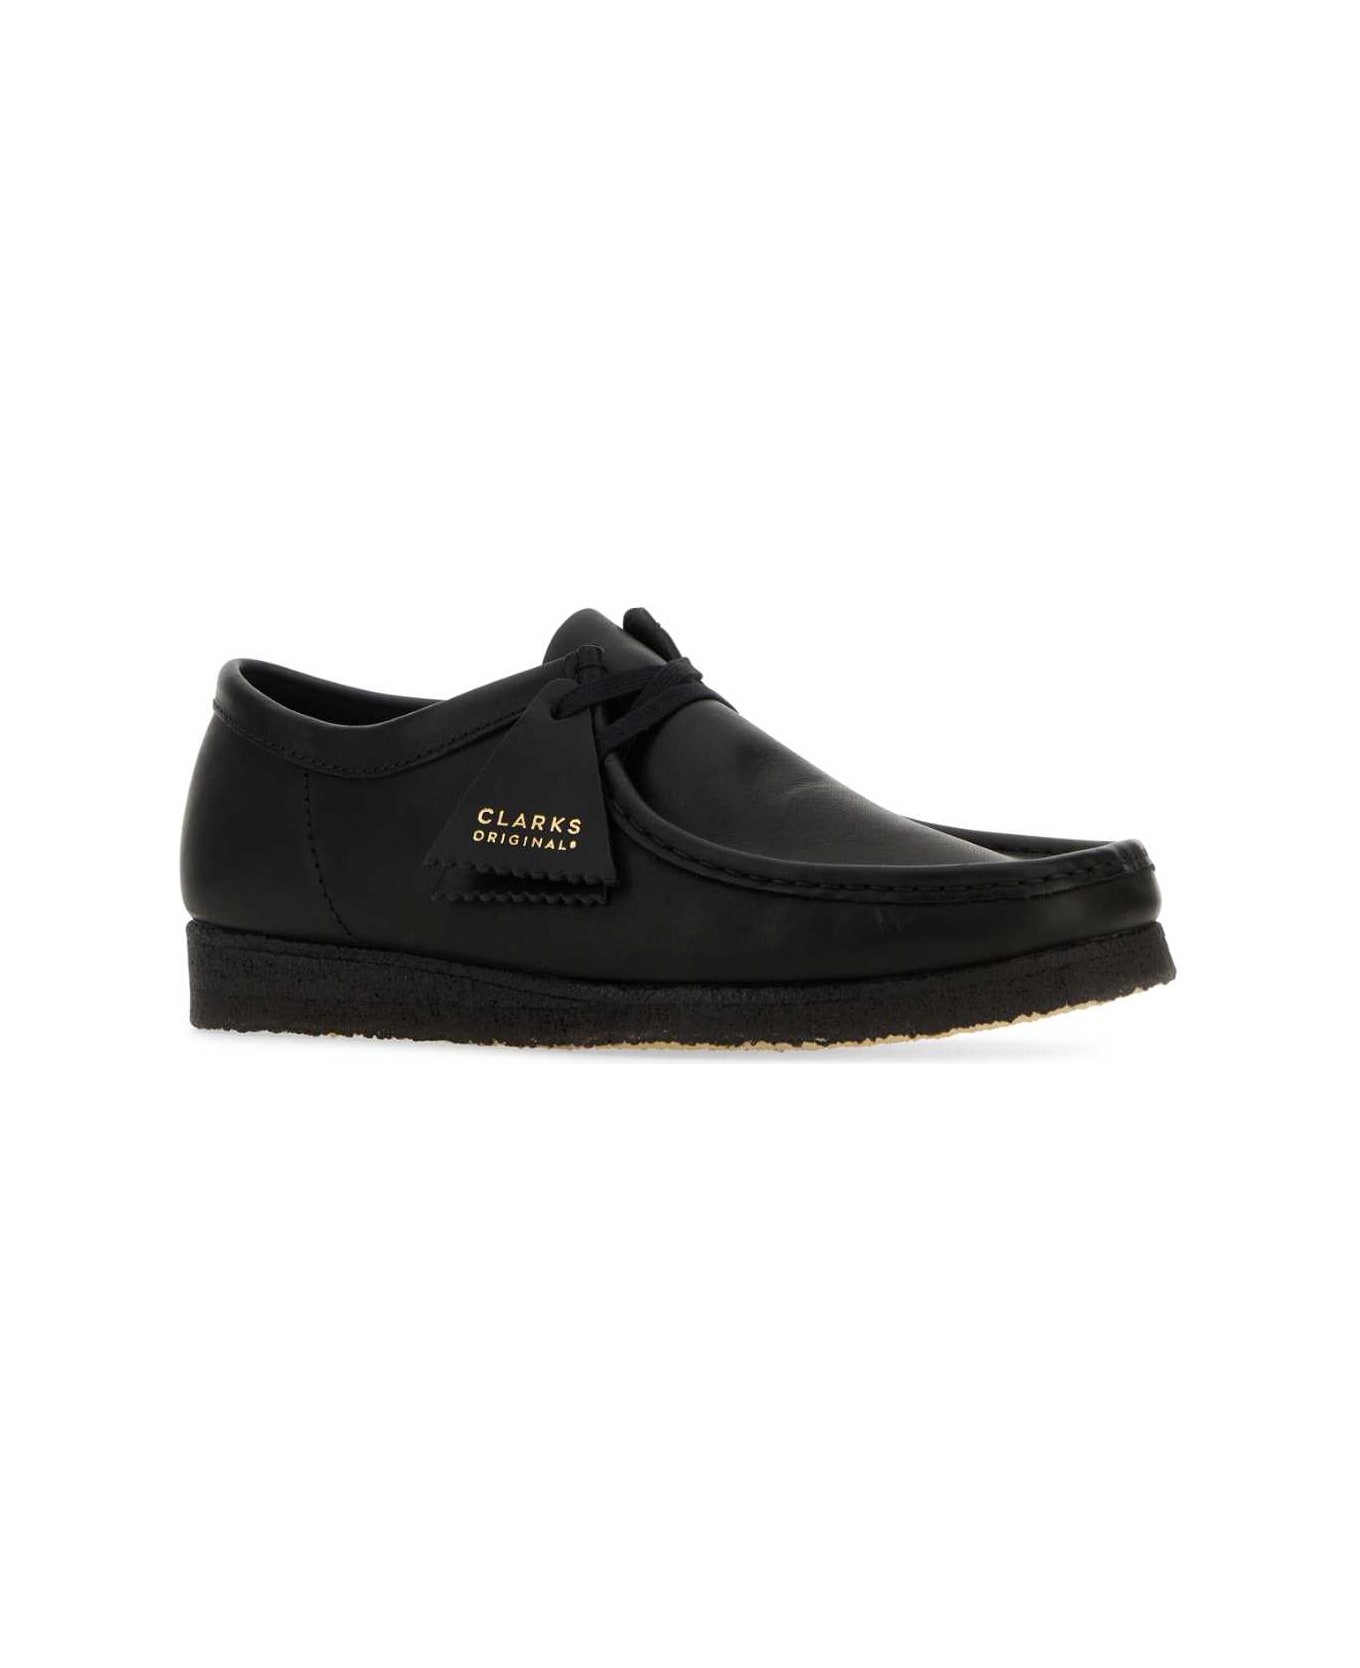 Clarks Black Leather Wallabee Ankle Boots - BLACKLEATHER